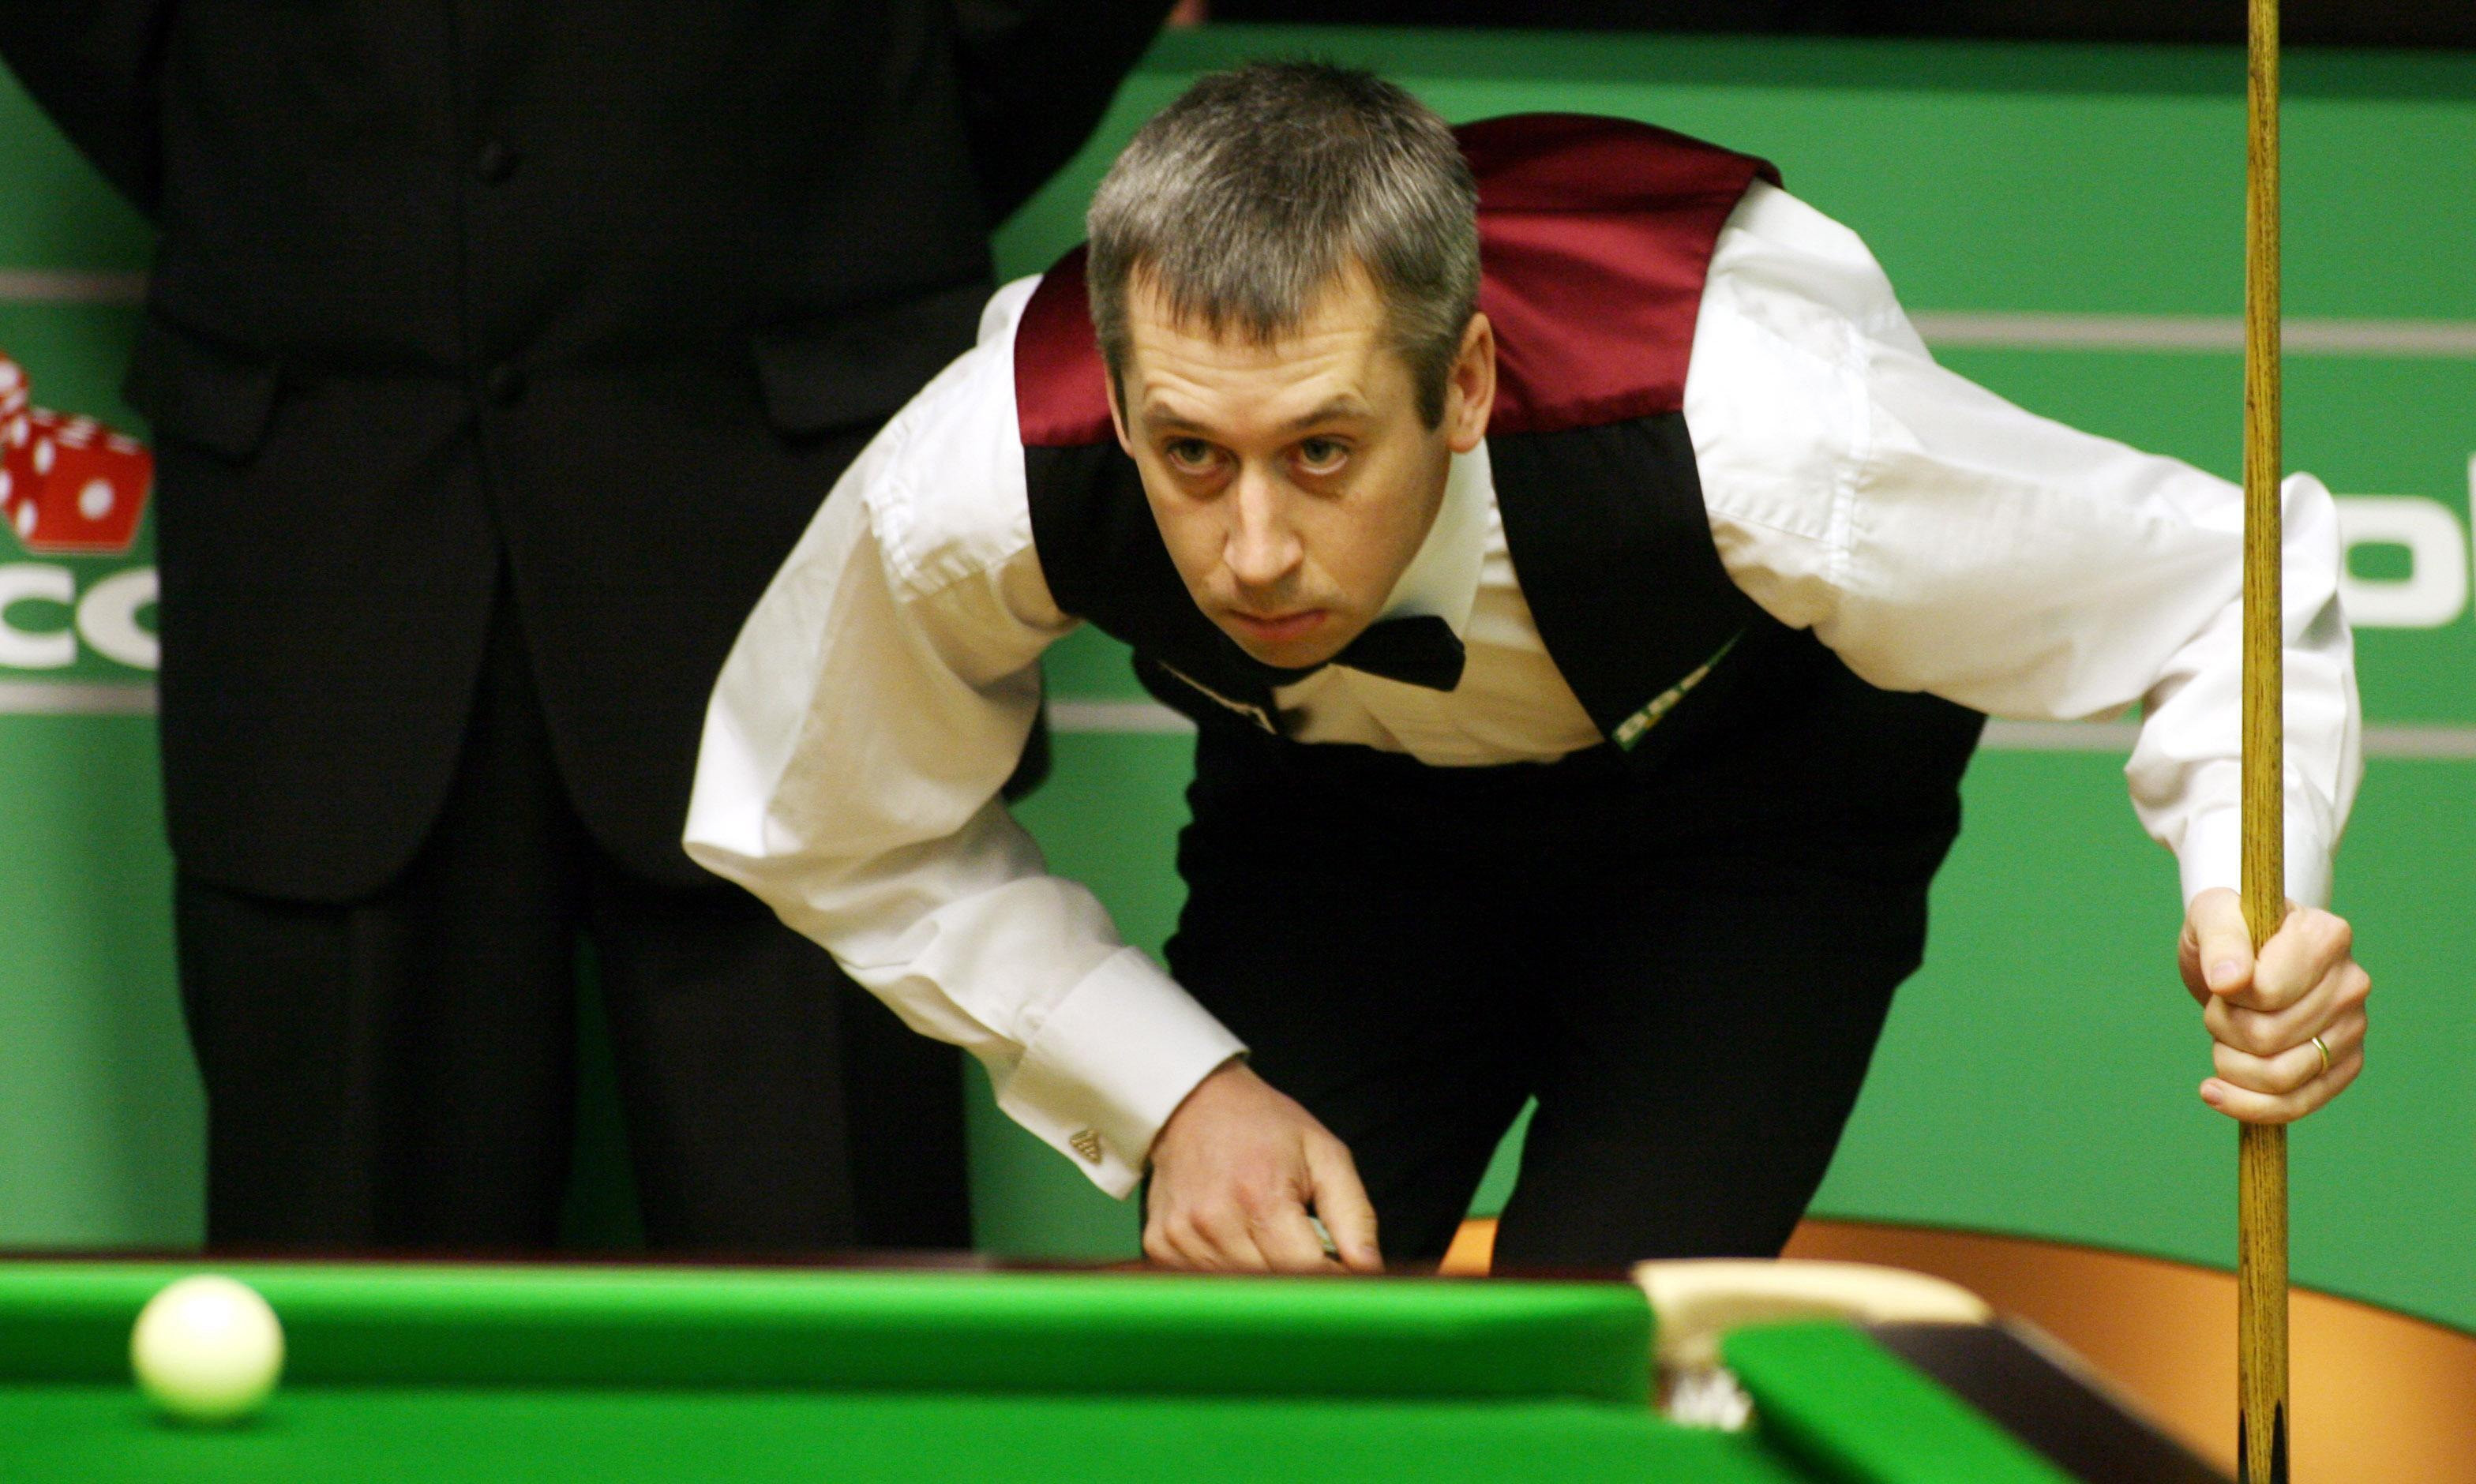 Nigel Bond retires from snooker after World Championship qualifying exit NewsChain